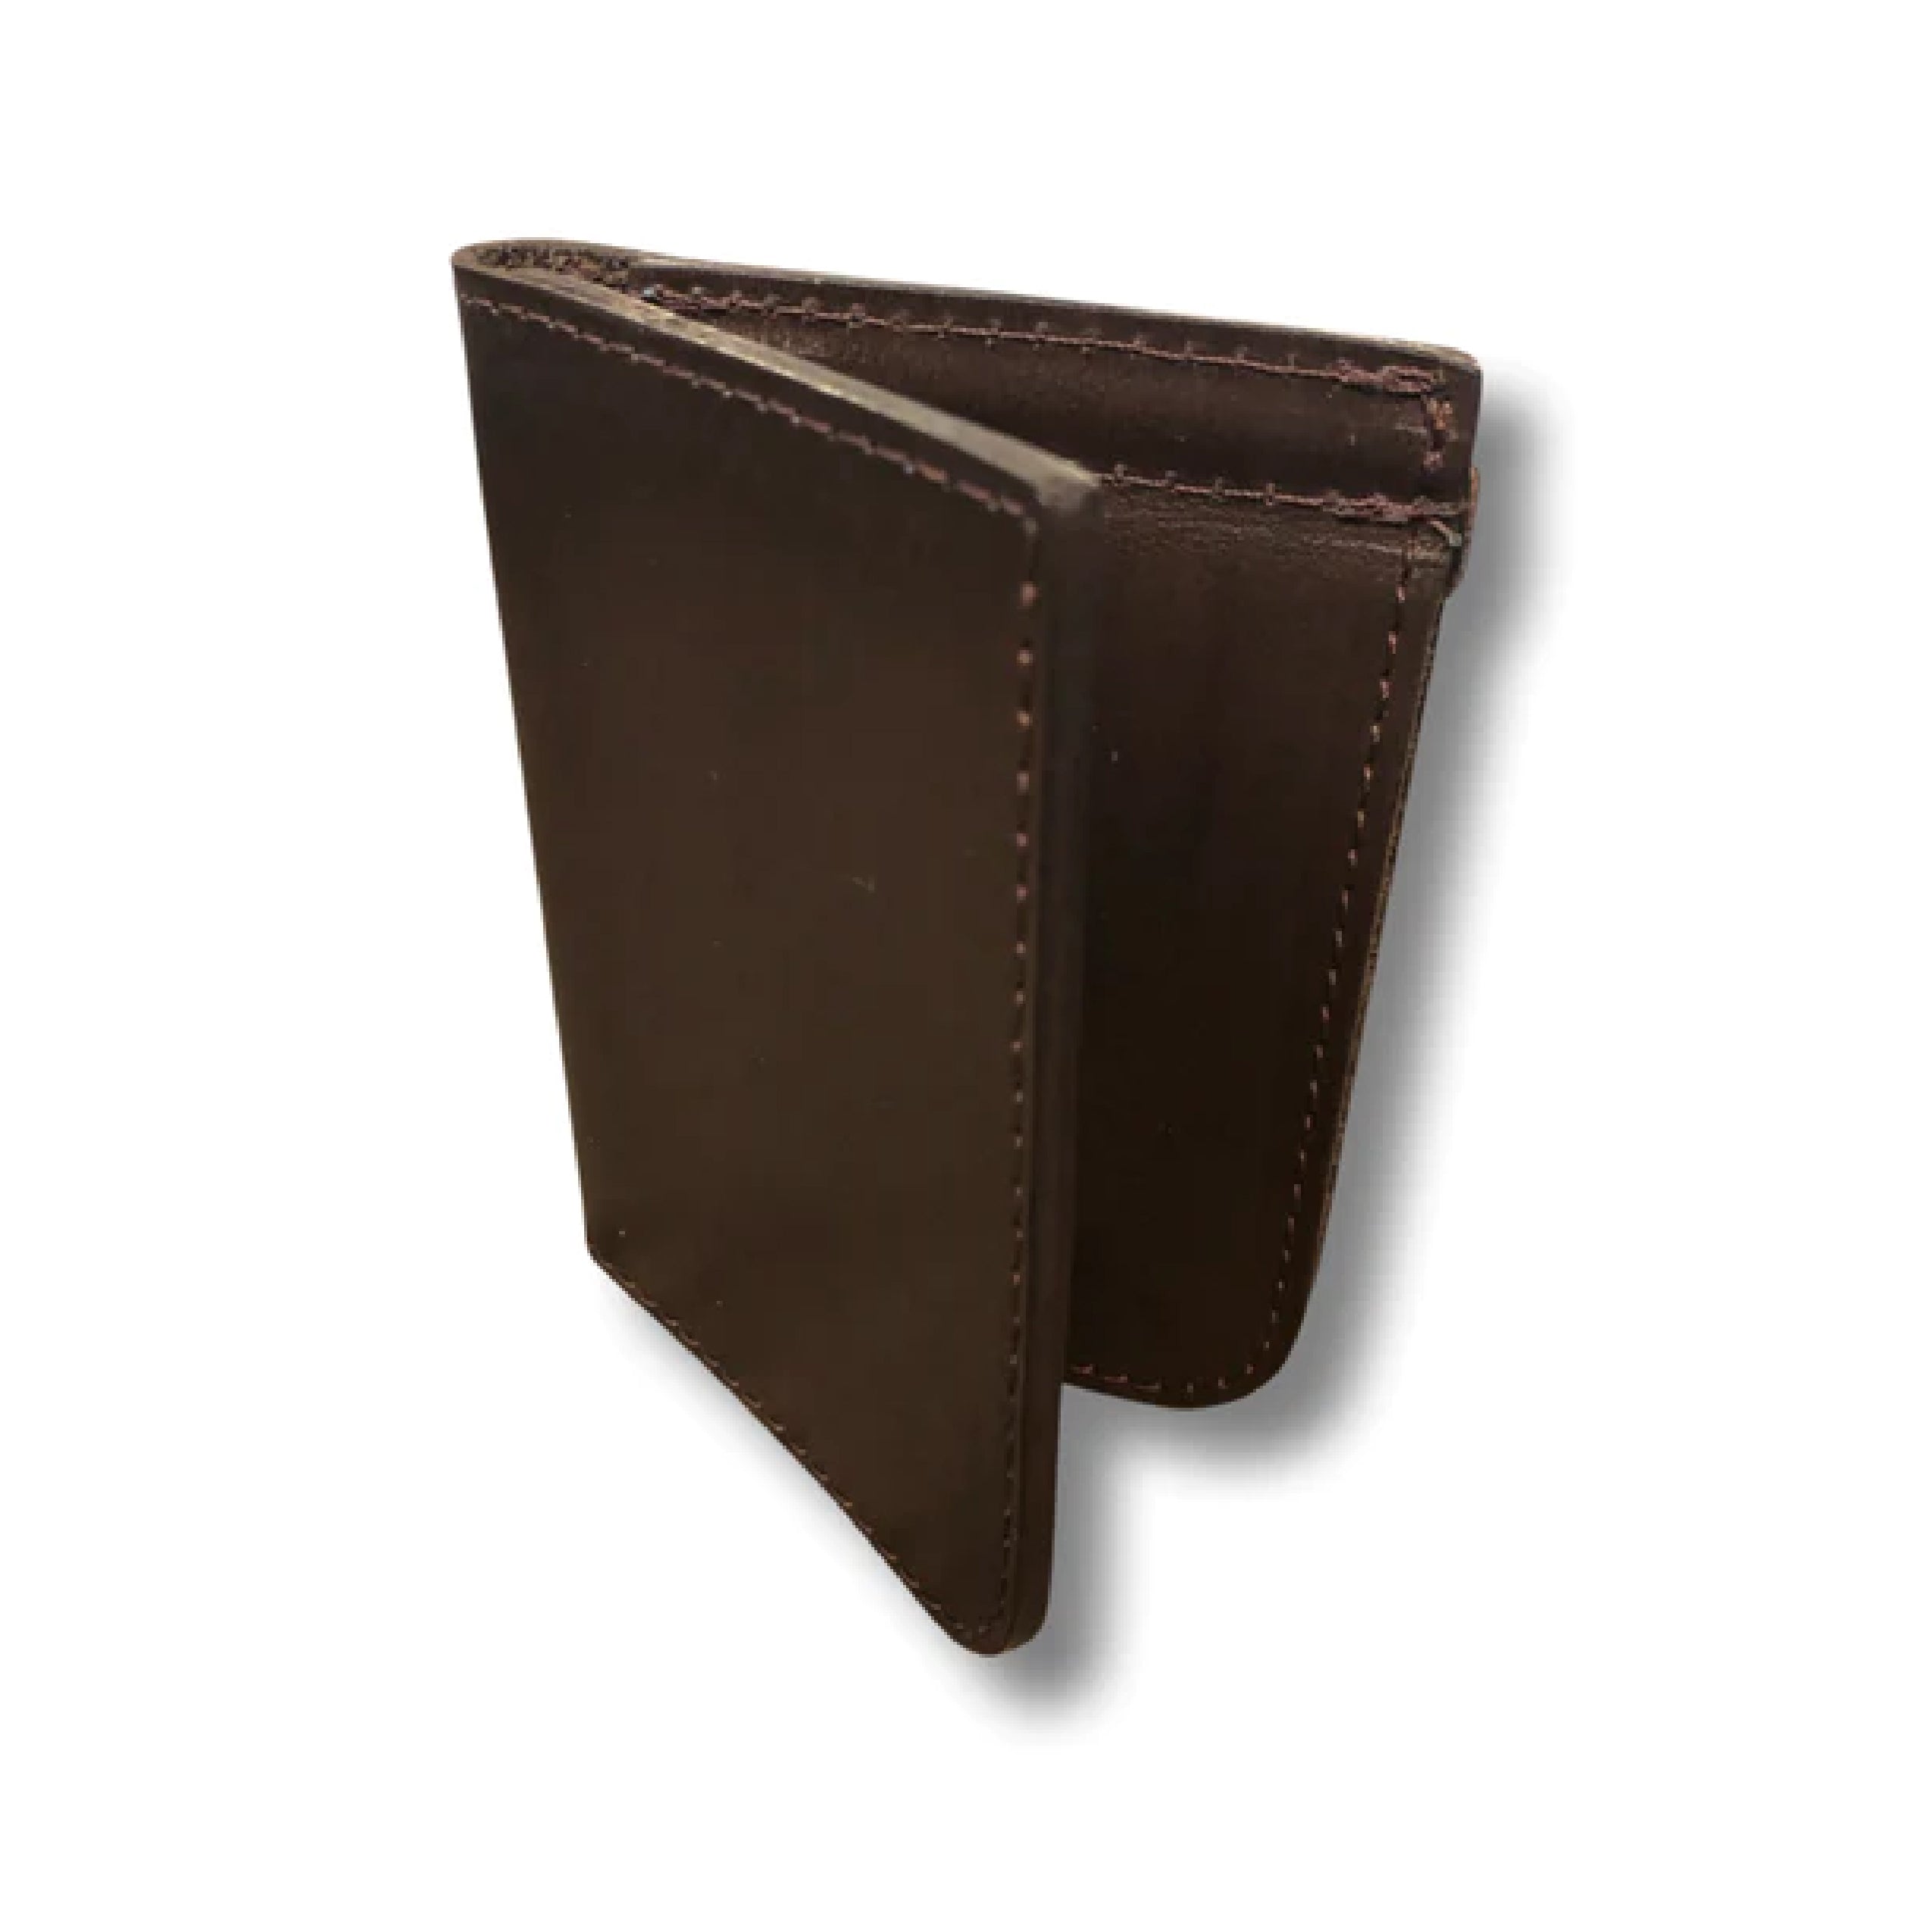 Dean WAL03a Clip Wallet brown leather